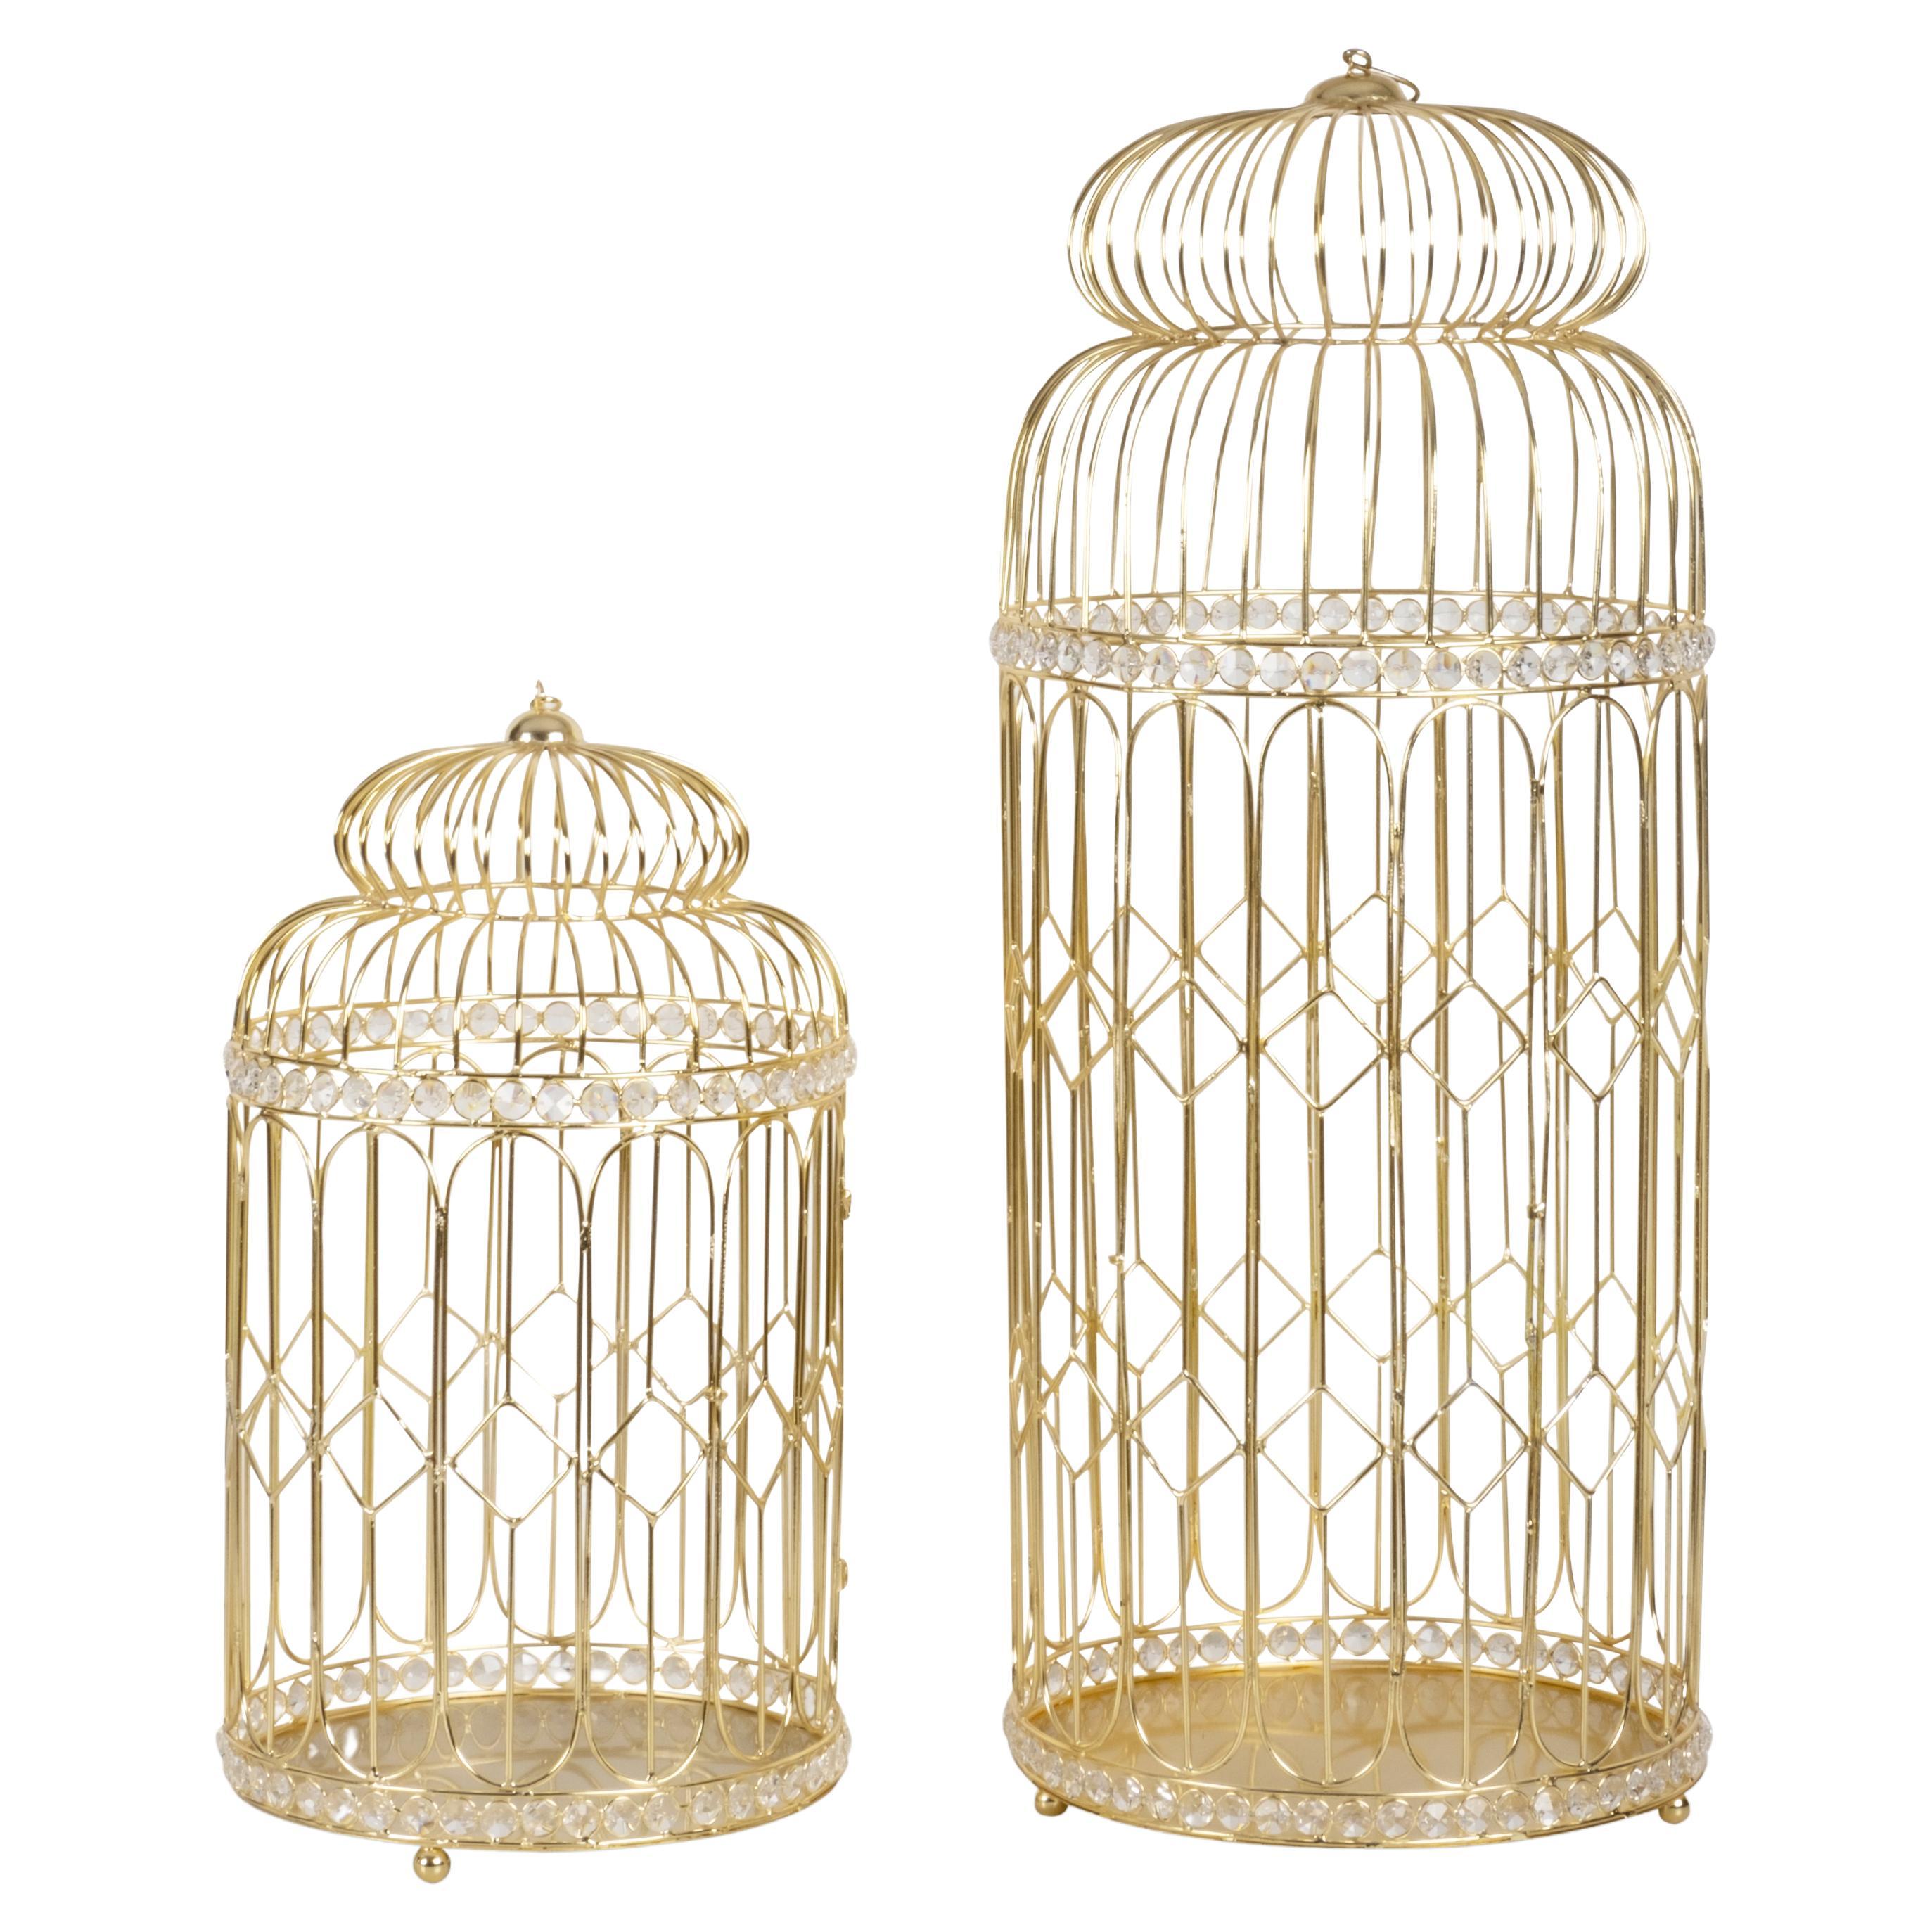 Set/2 Birdcages, Golden Plating & Crystals, Handmade by Lusitanus Home For Sale